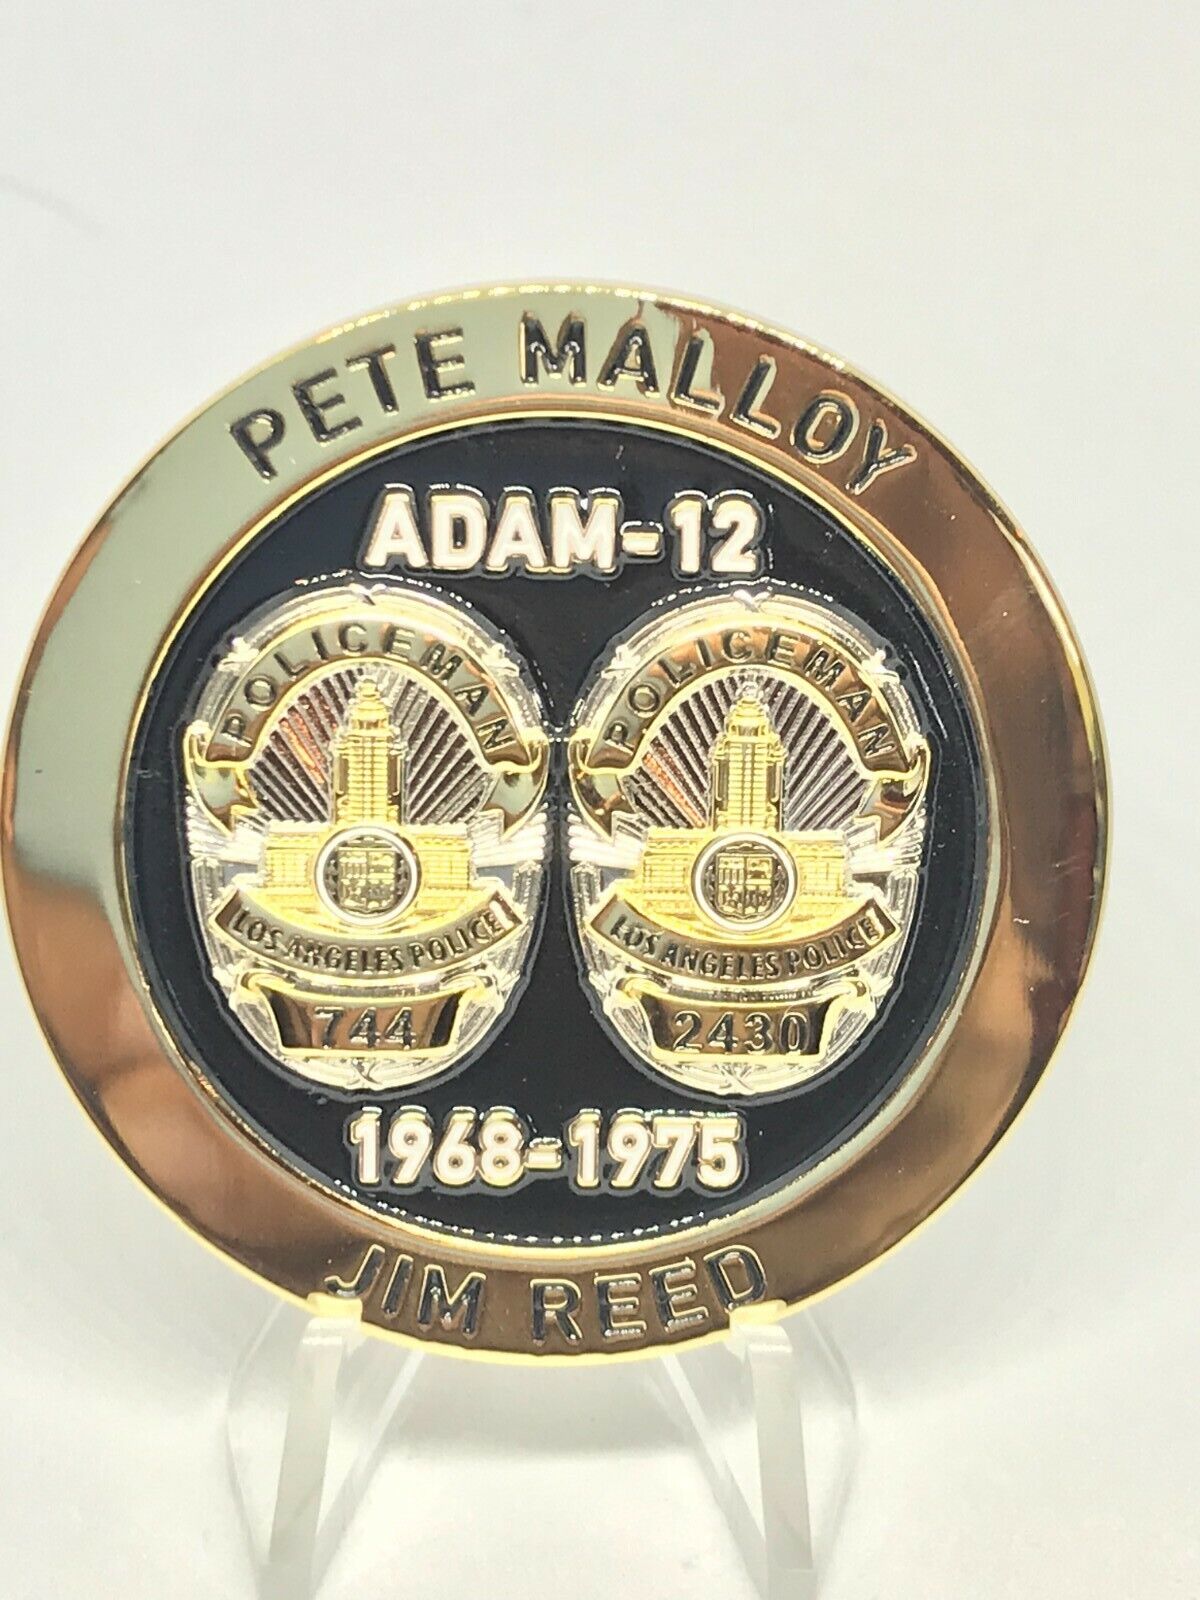 ADAM 12 - LAPD - Collectable Challenge Coin - Reed/Malloy - Limited Edition